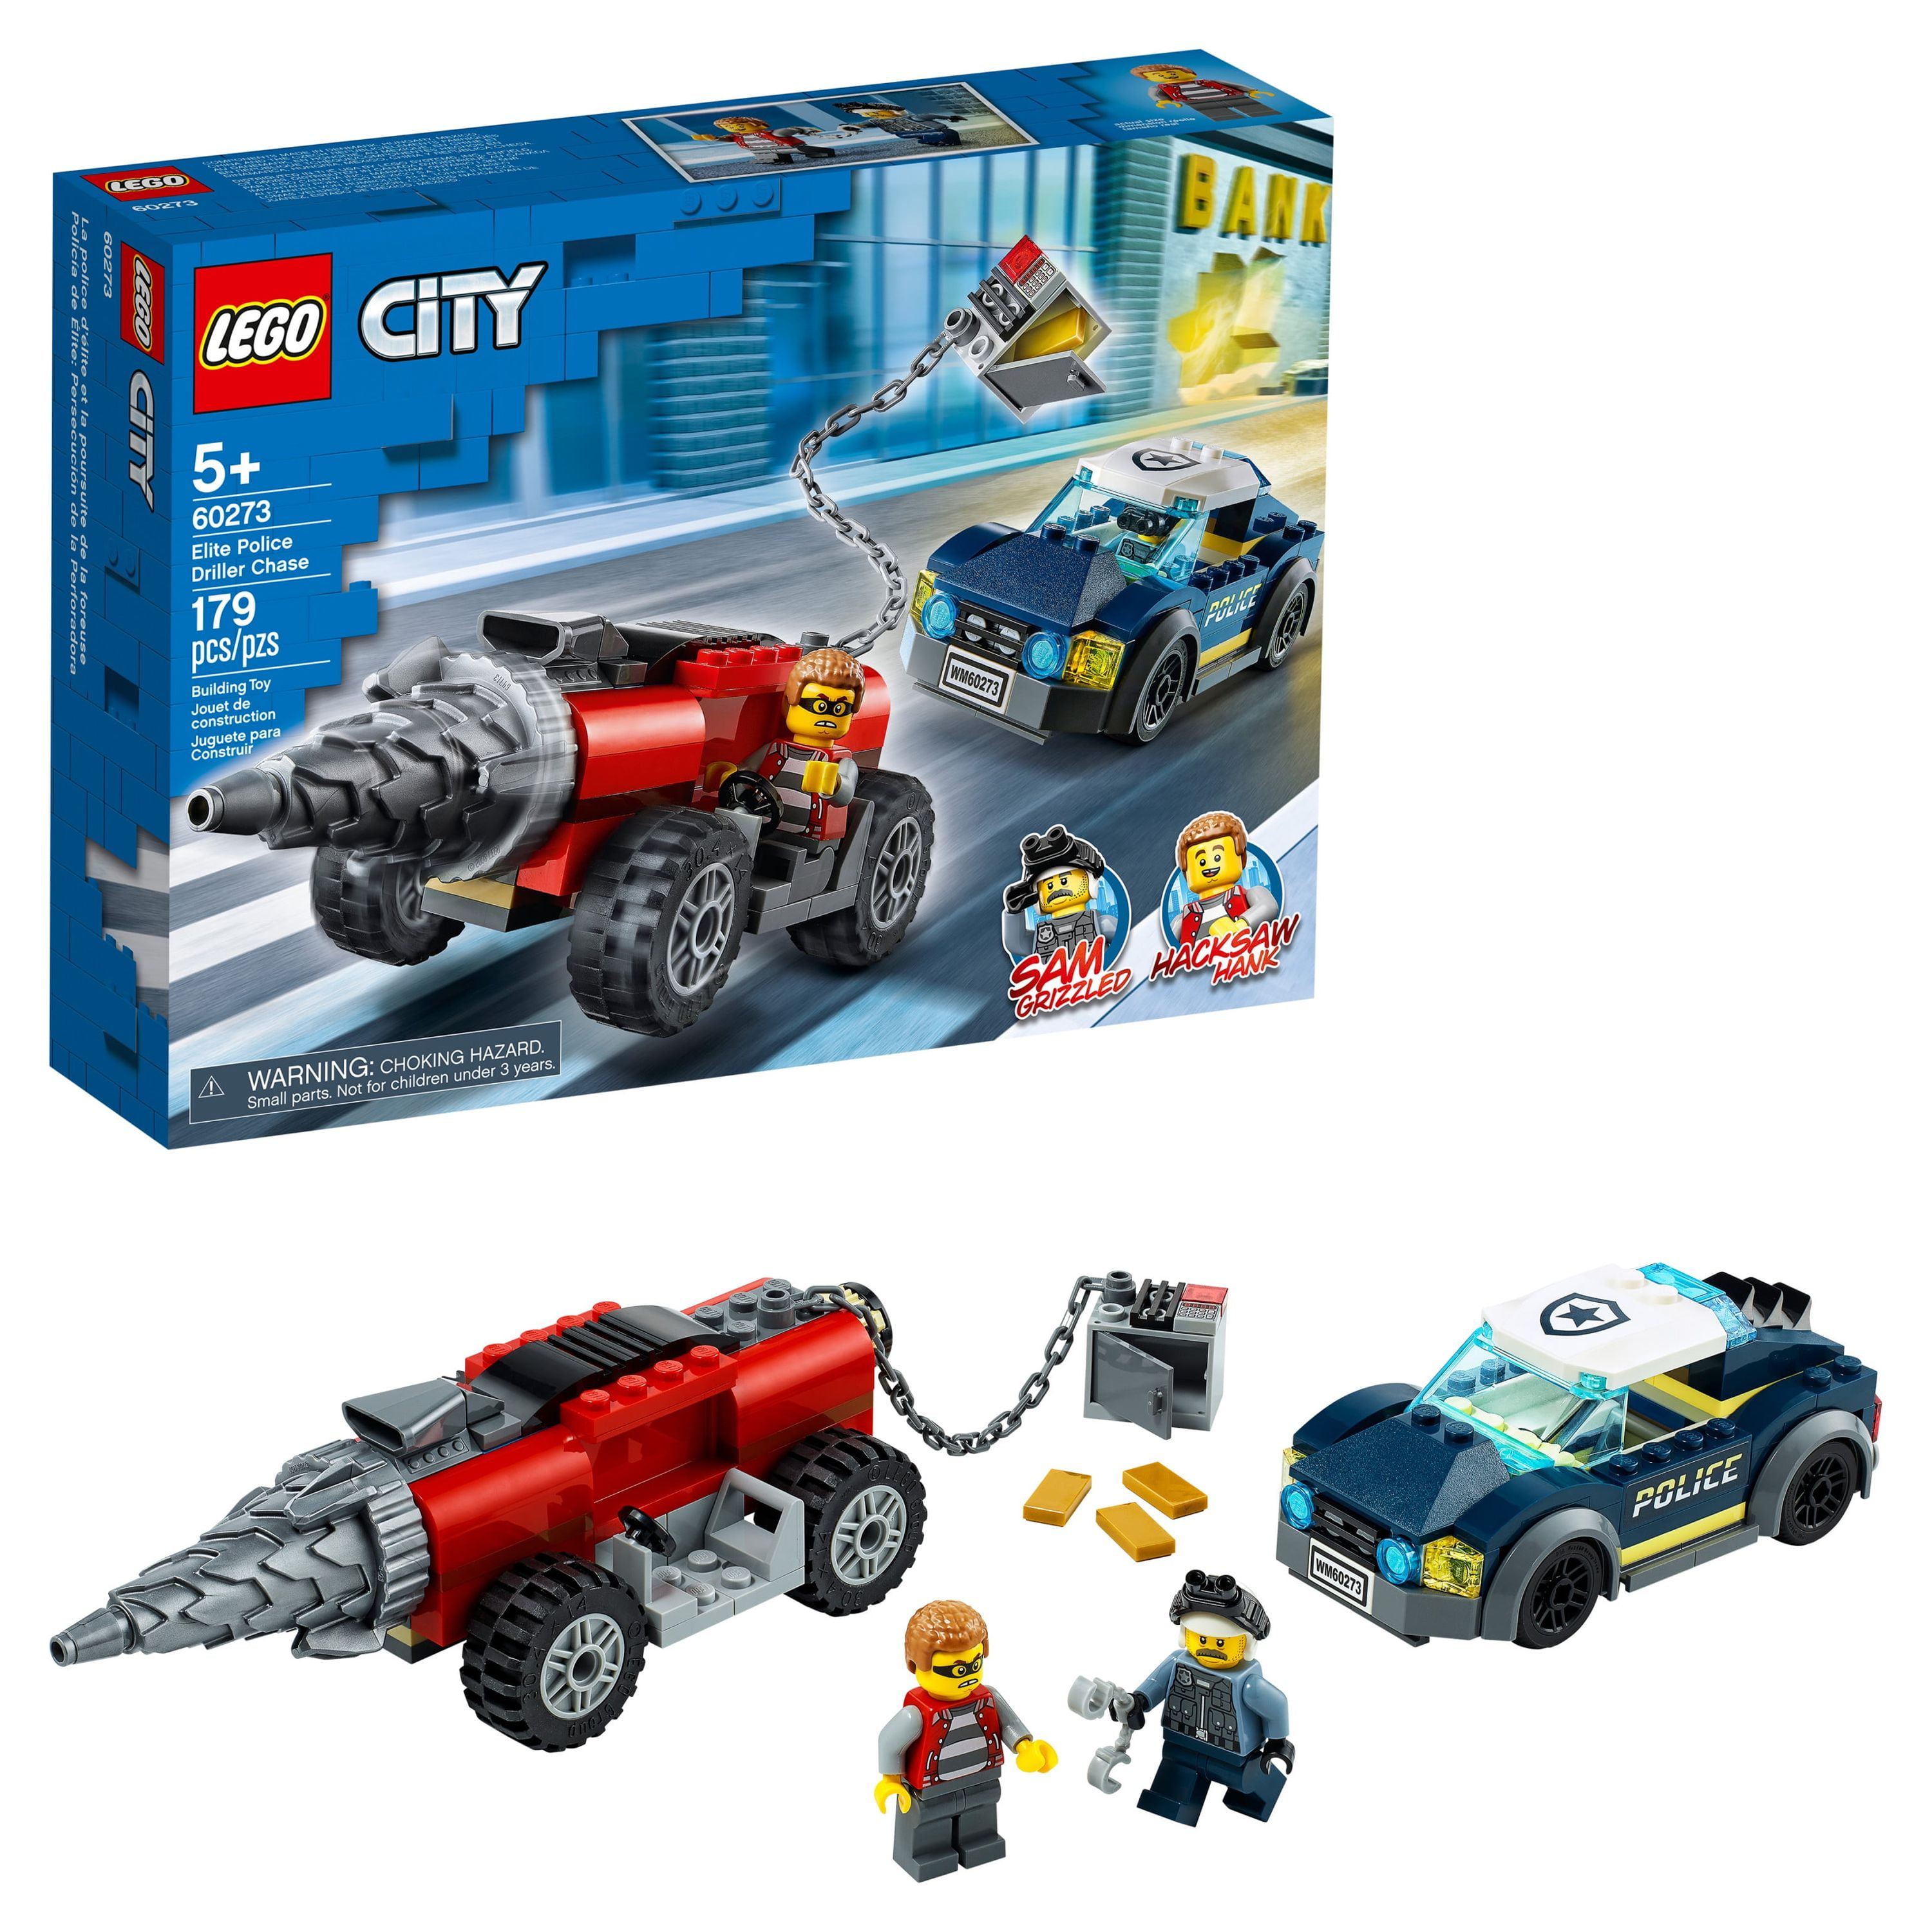 Select Walmart Stores: 179-Piece LEGO City Police Driller Chase Building Set w/ 2 Minifigures, Lego Building Instructions Guide & App (60273) $15.27 + Free S&H w/ Walmart+ or $35+